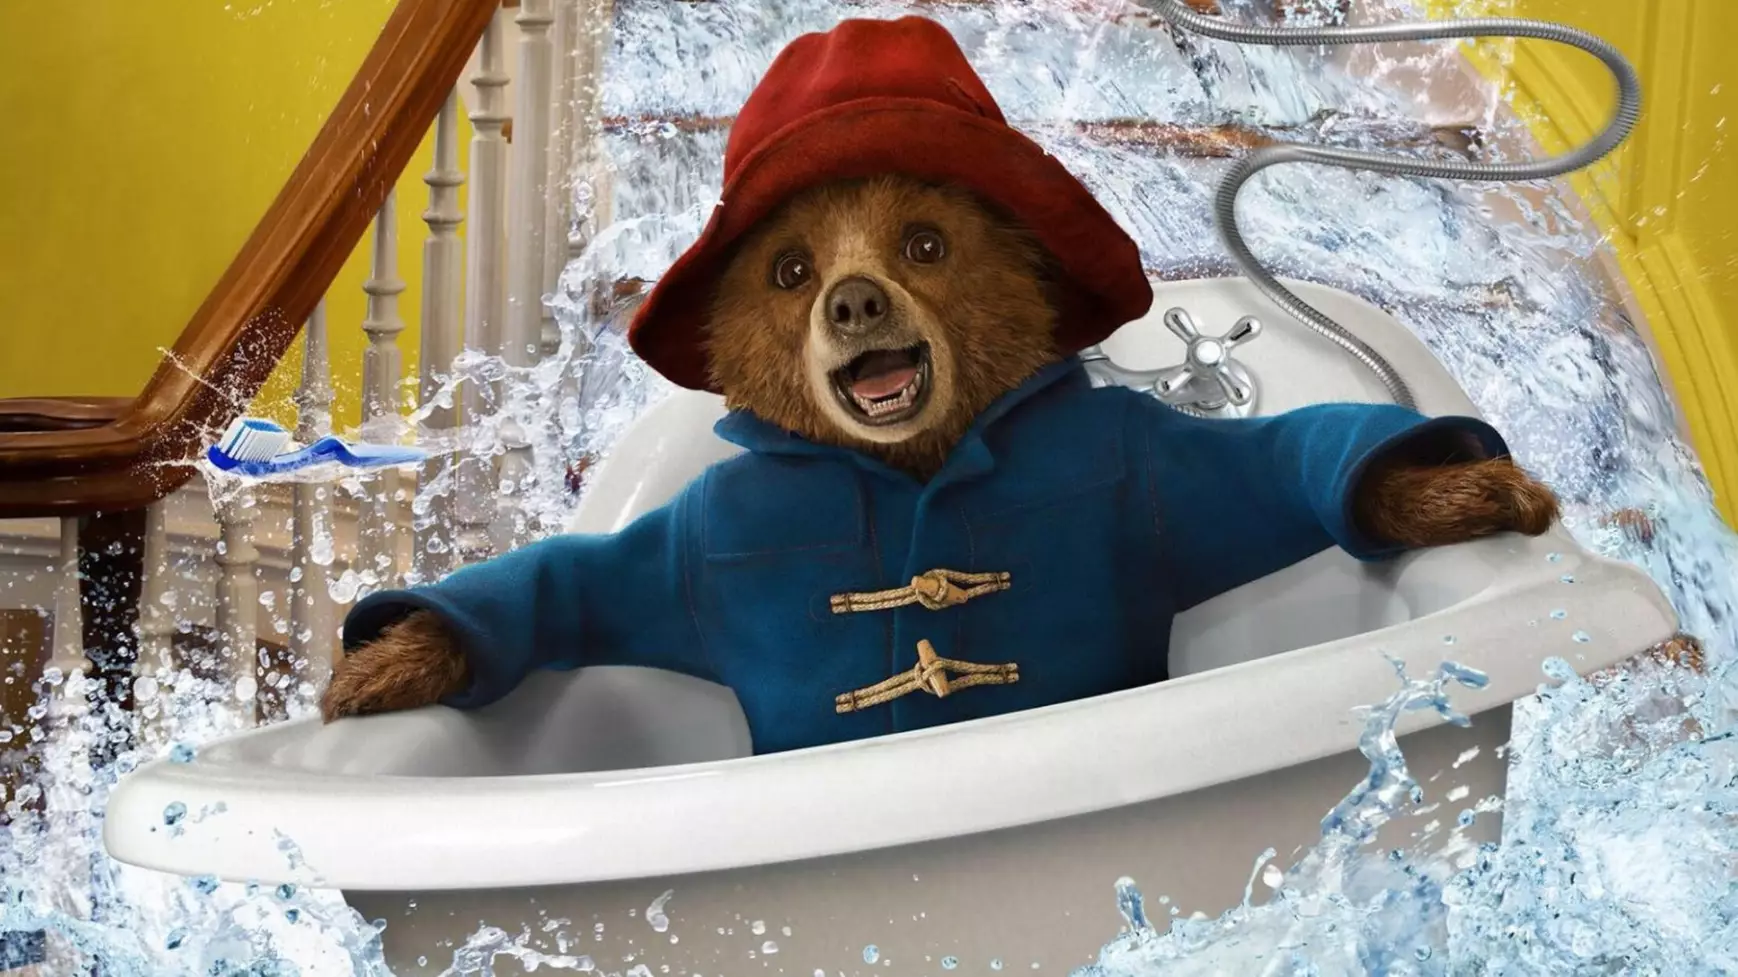 School Kids Shown Obscene Image By Accident Instead Of 'Paddington'